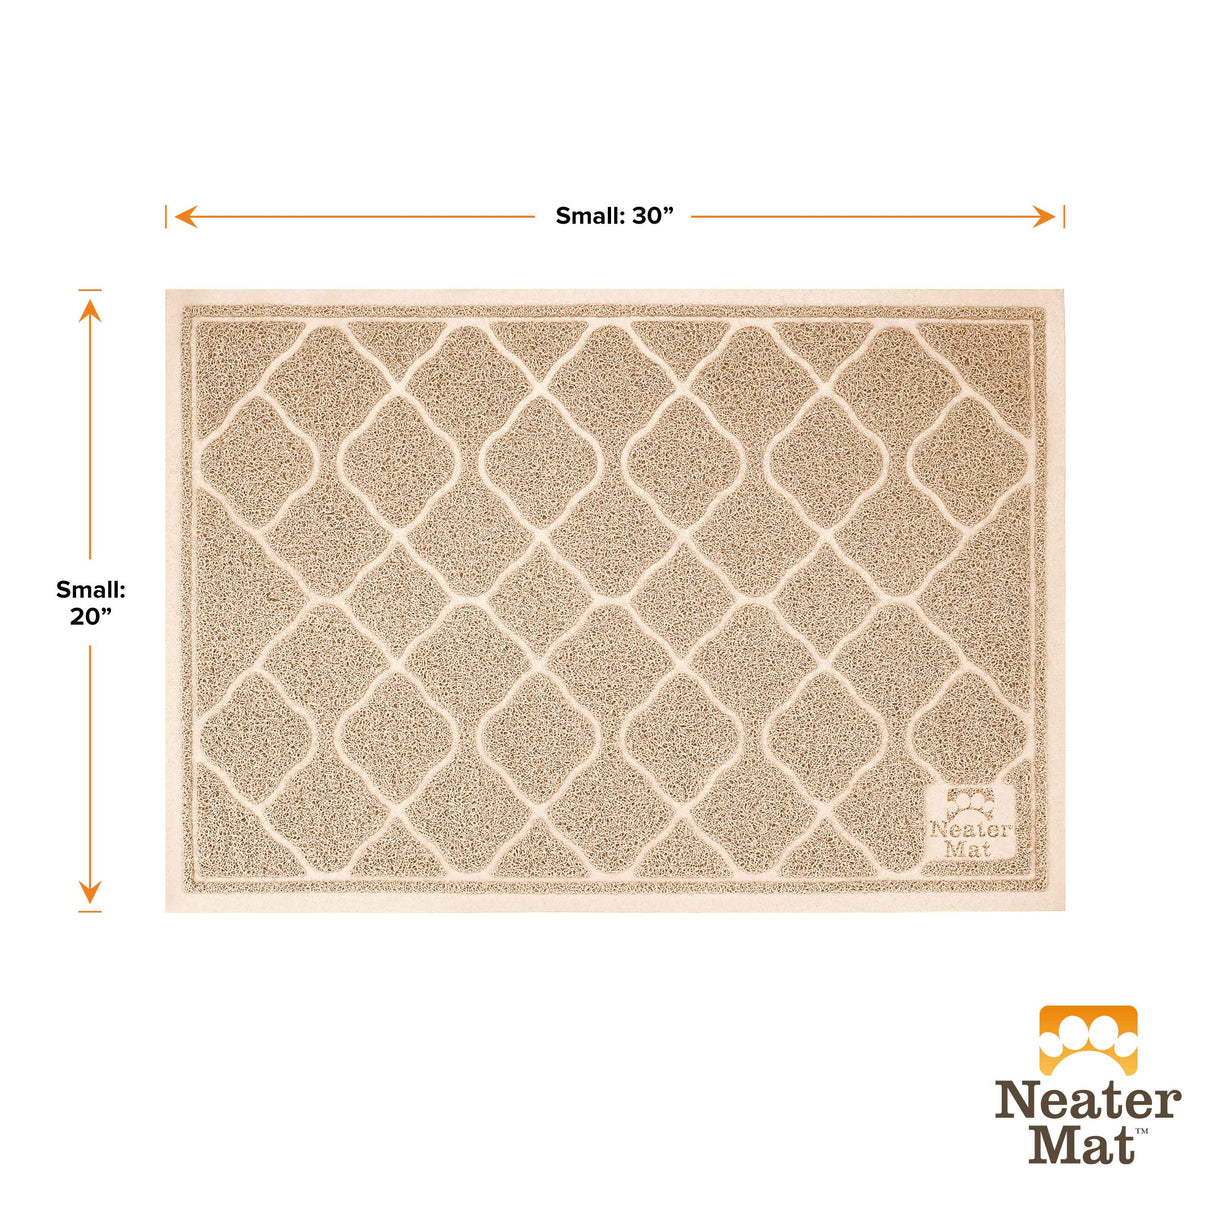 Dimensions of the Small Beige Neater Pets Litter Trapping Mat